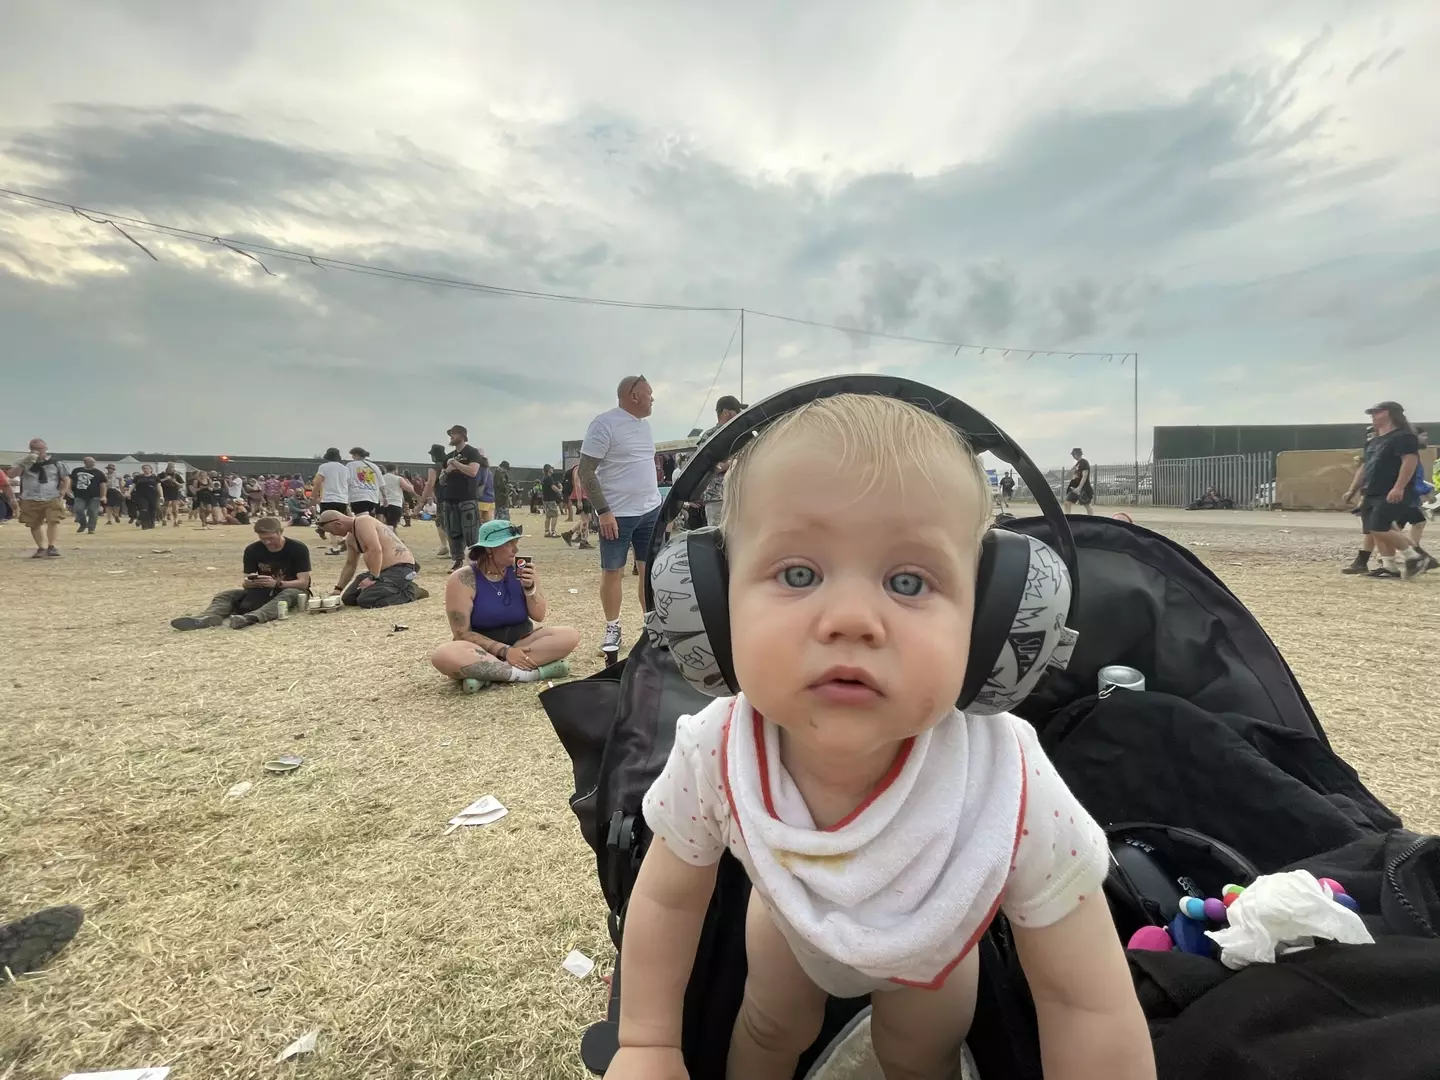 Baby Lemmy wore headphones at the festival.